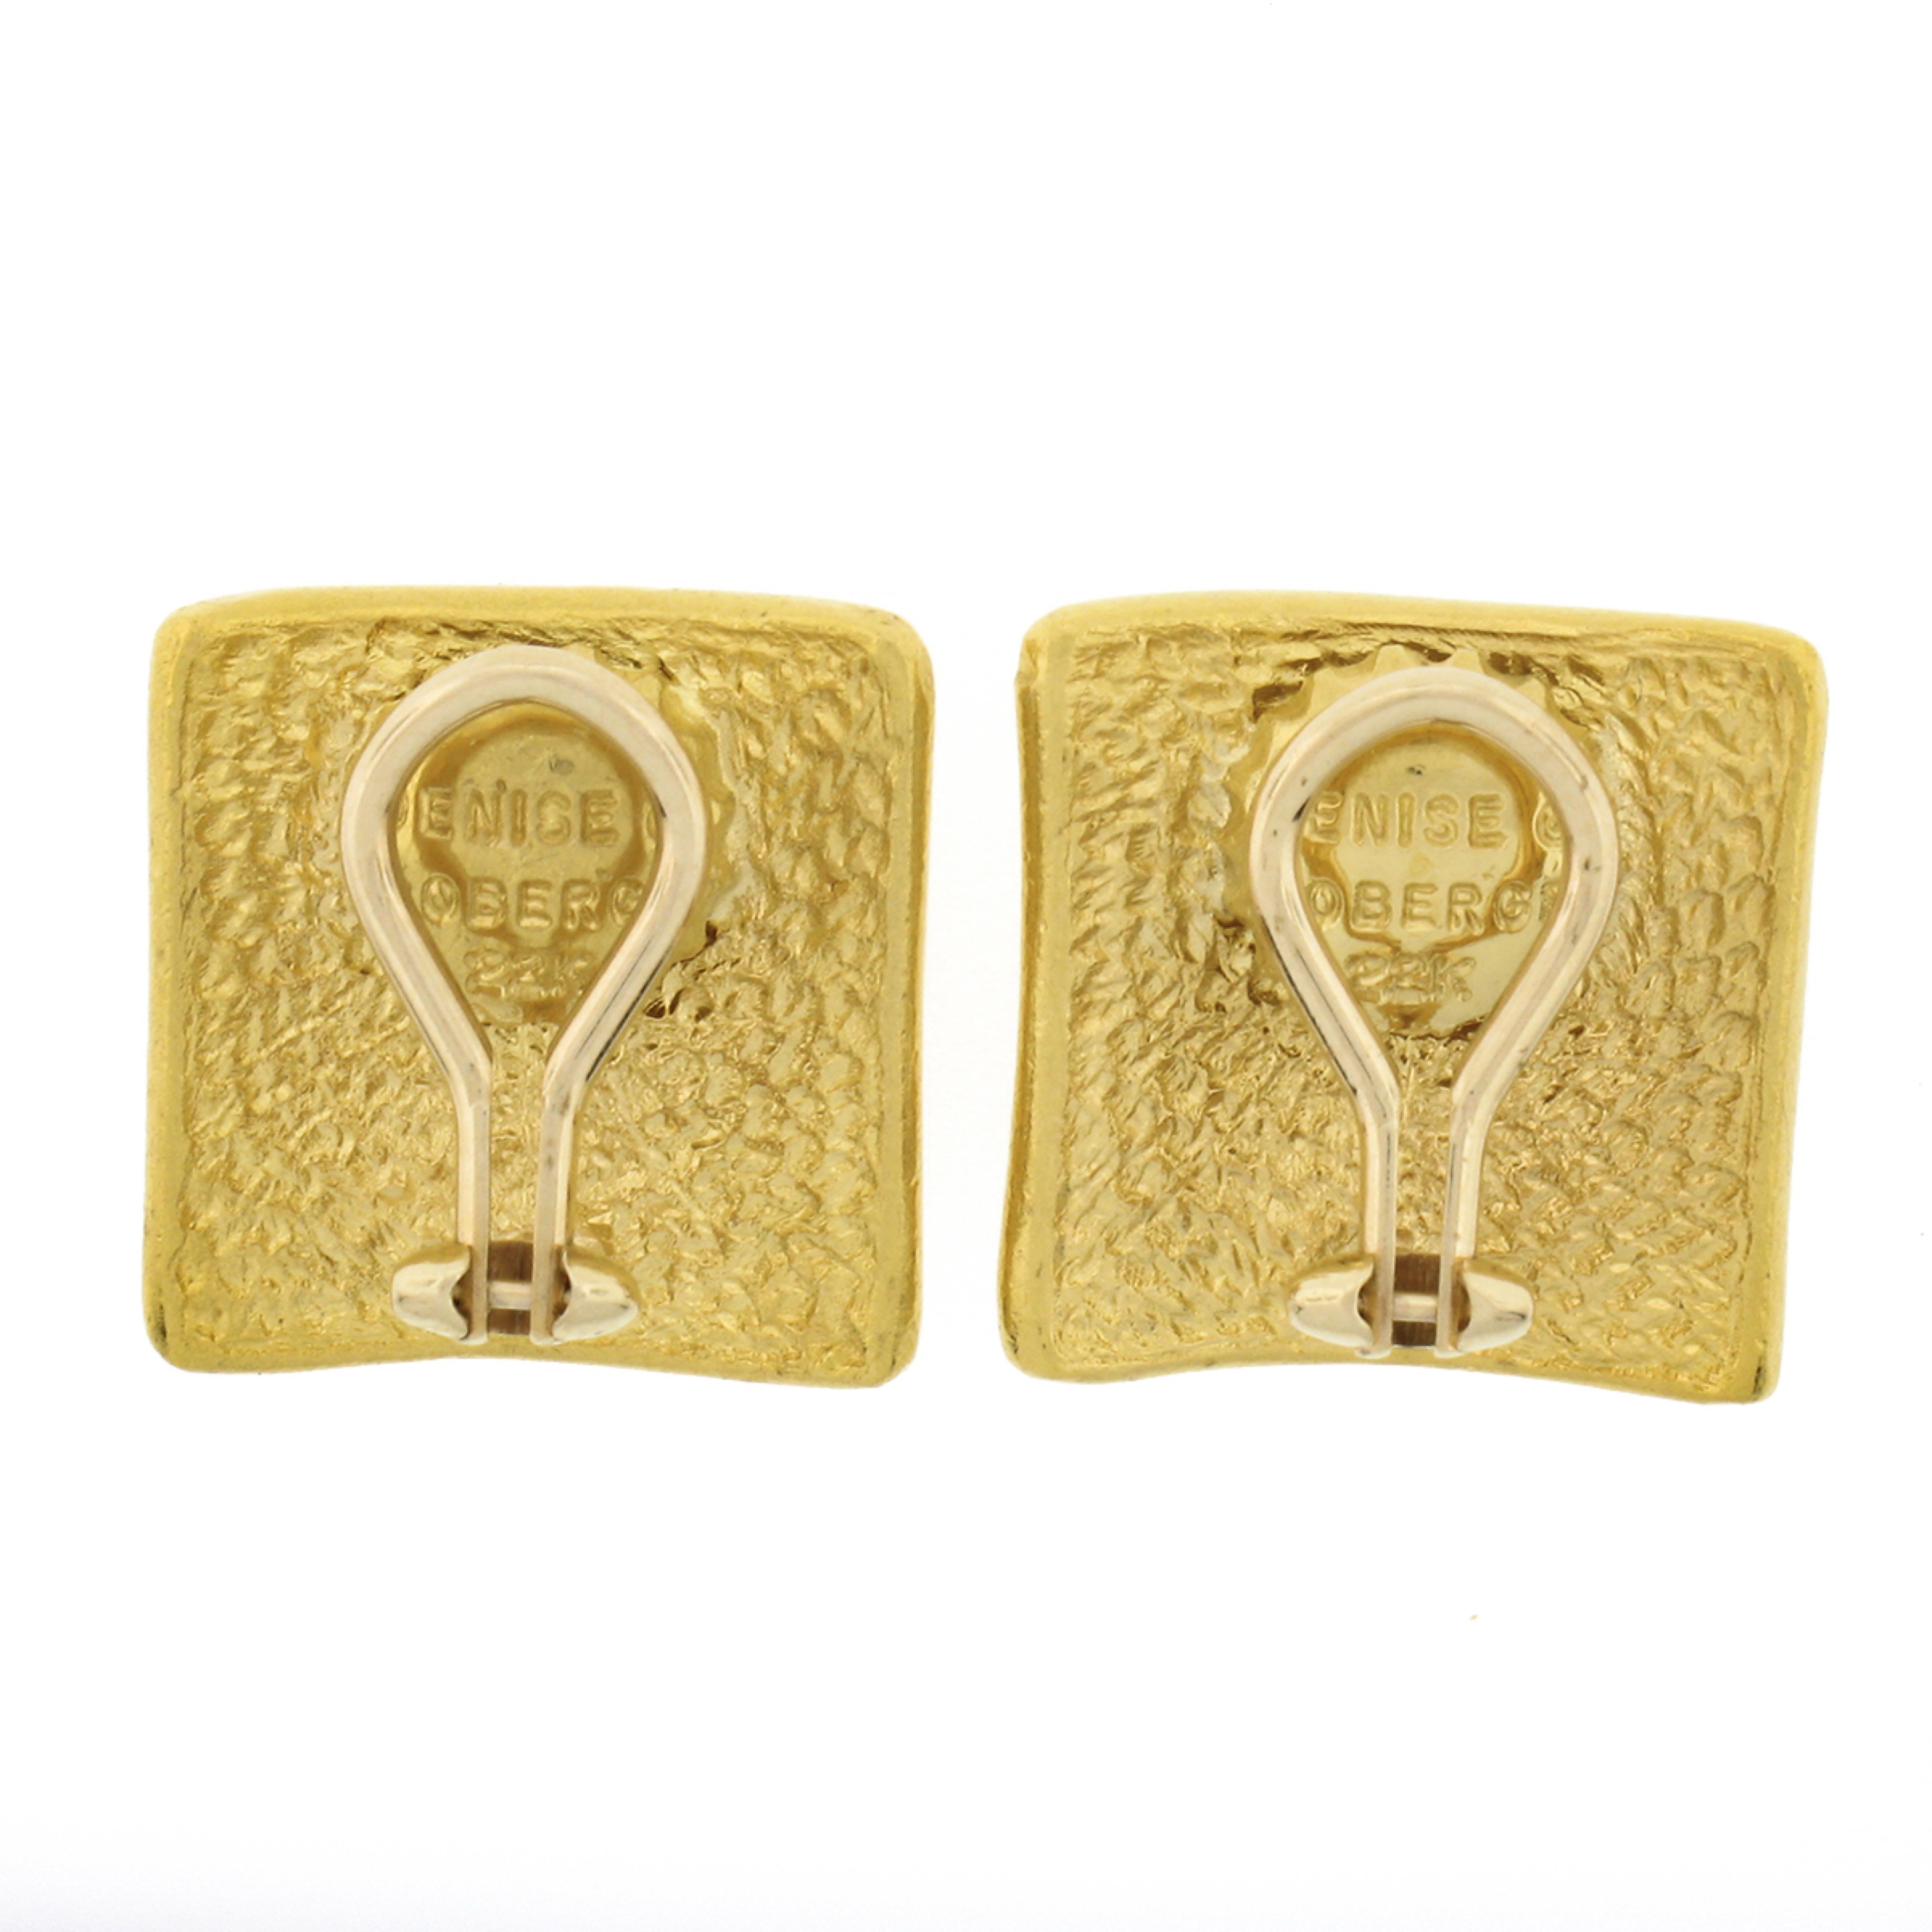 Women's Denise Roberge 22K Gold Detailed Textured Shield Seal Squared Button Earrings